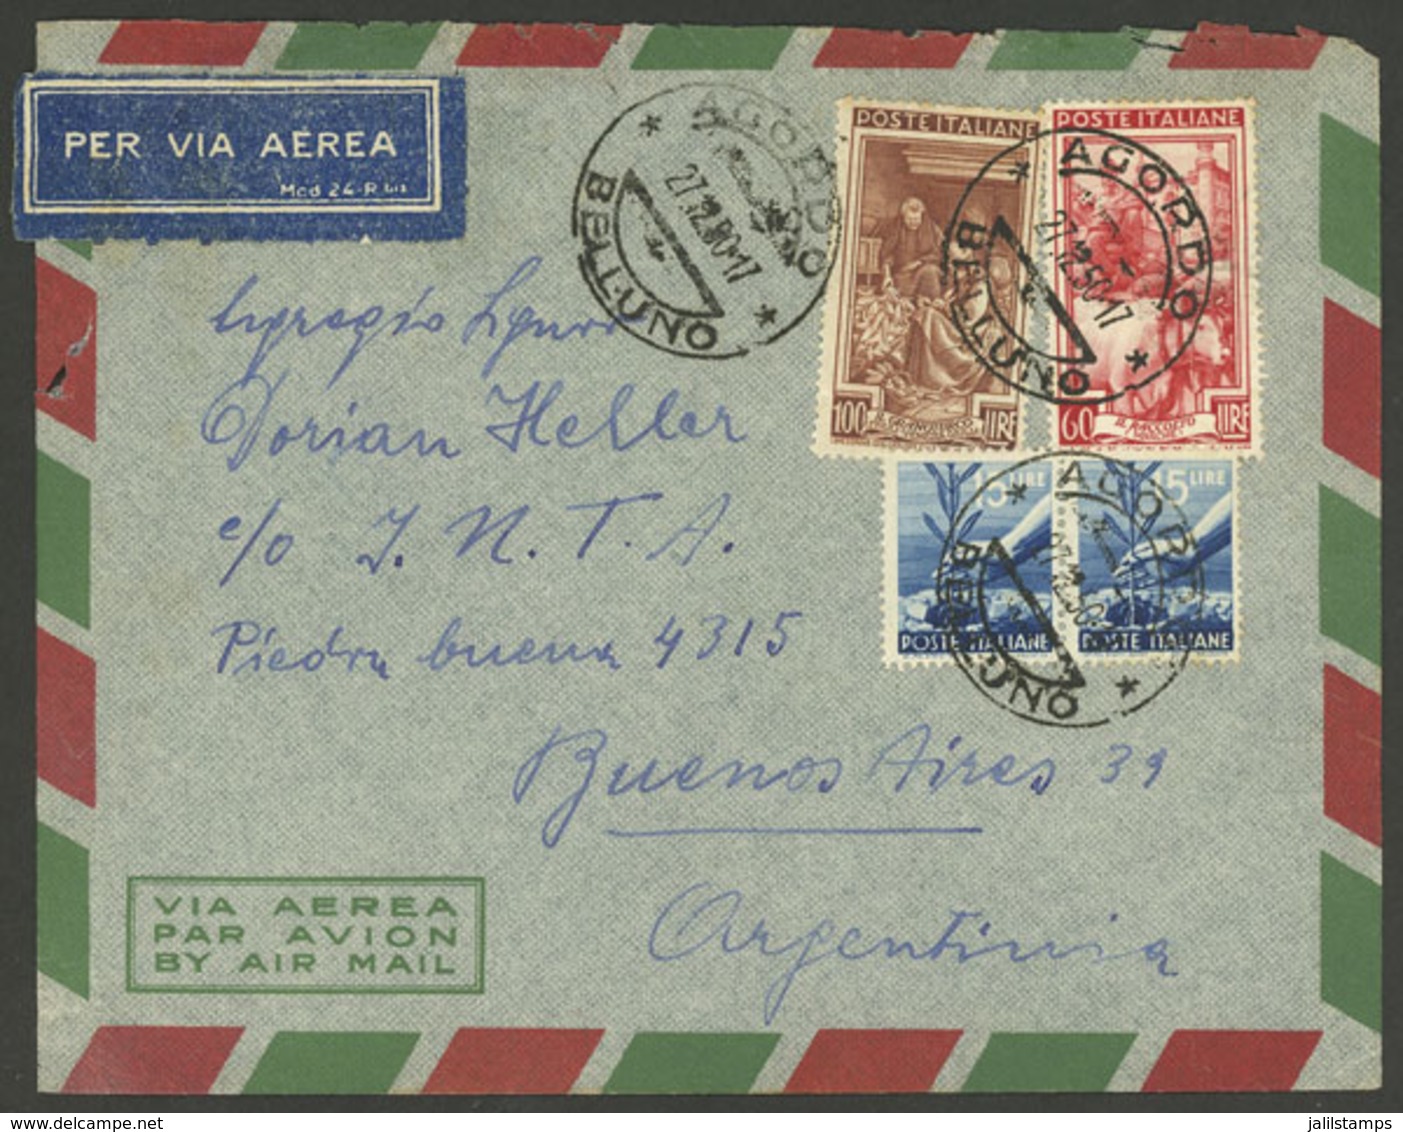 ITALY: 27/DE/1950 Agordo - Argentina, Airmail Cover With Mixed Postage Democratica + Lavoro (total 190L.), And Arrival B - Unclassified